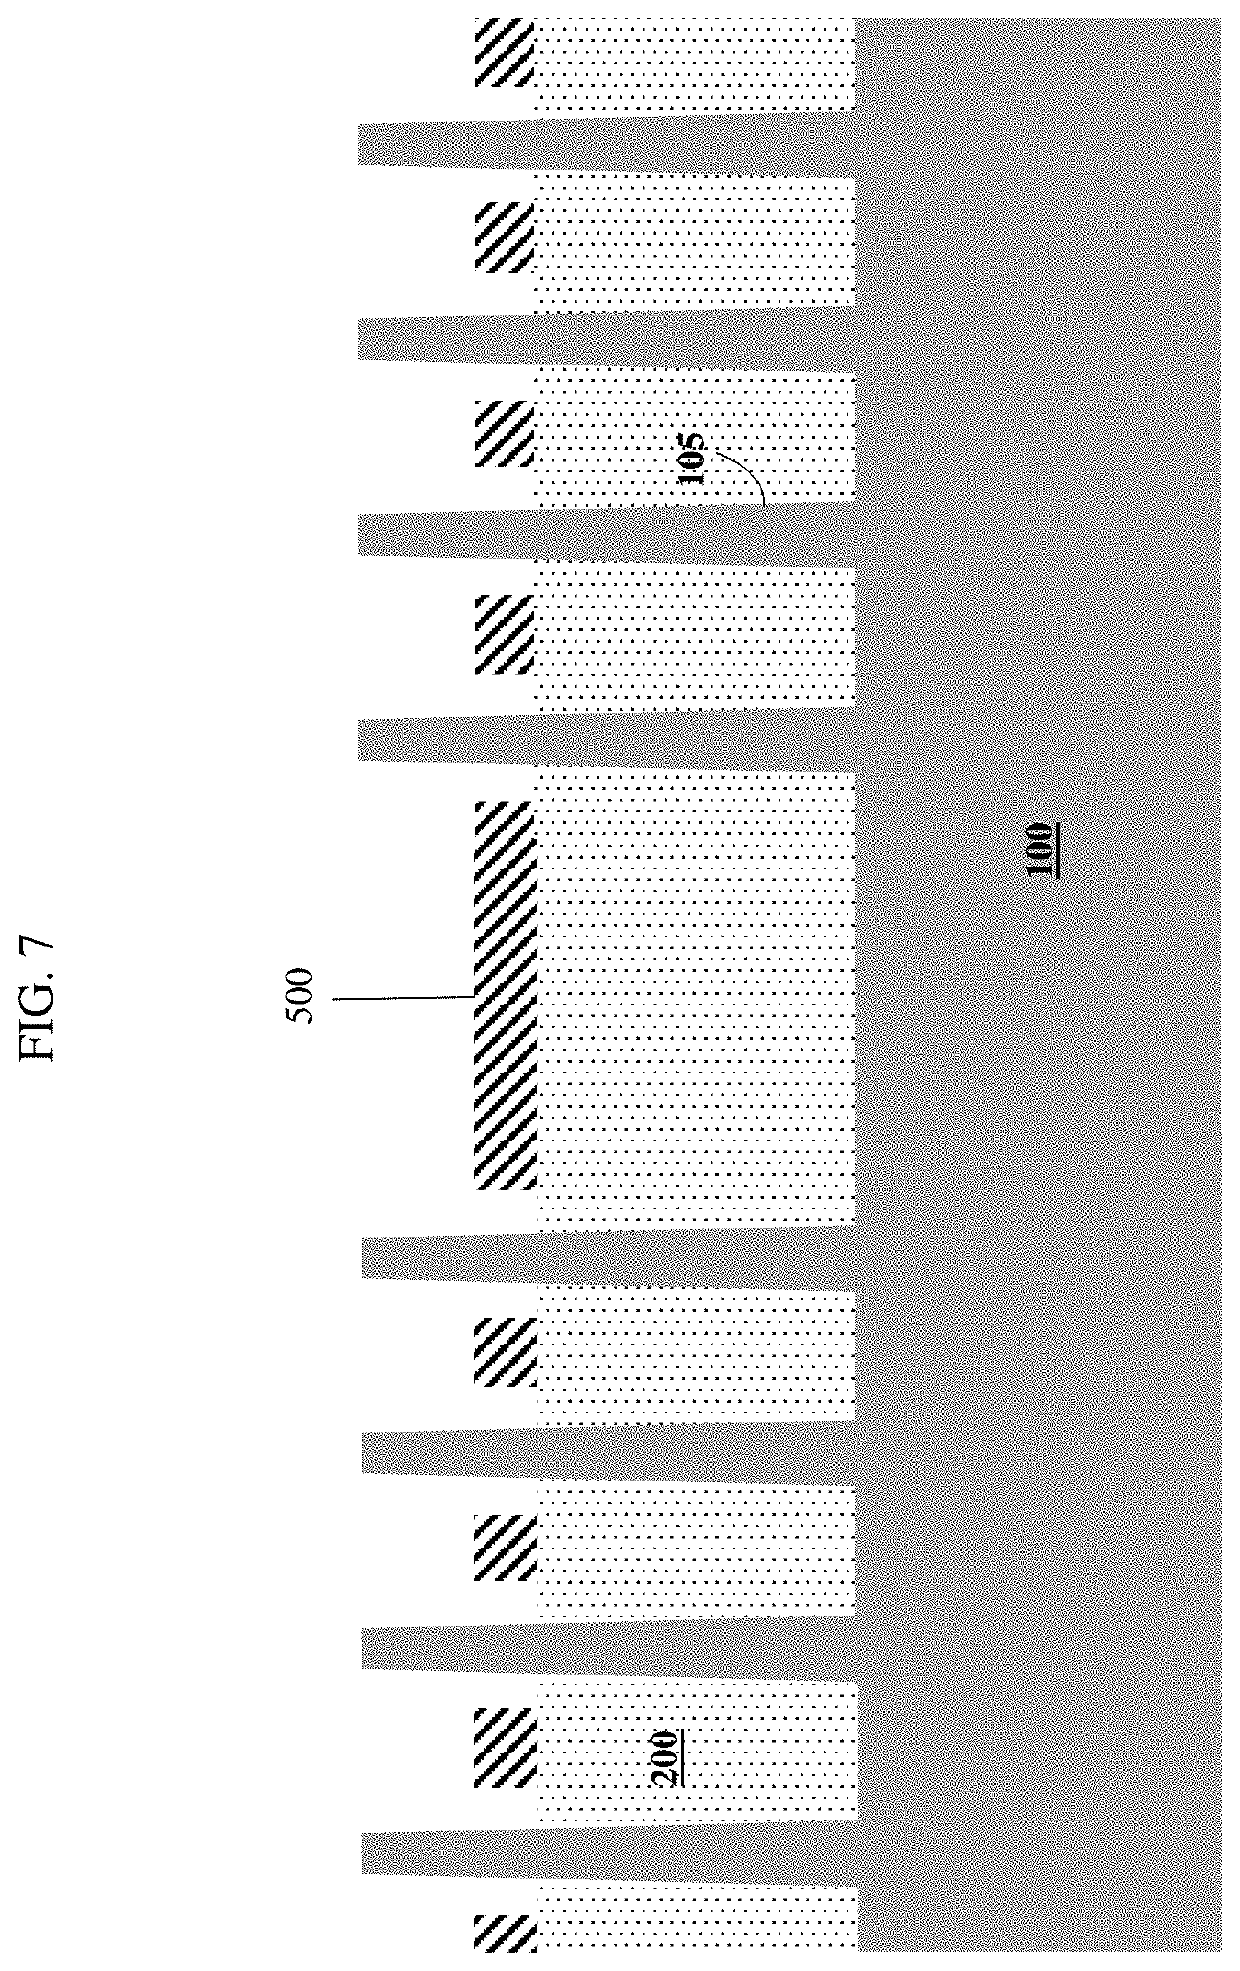 Finfet structure with dielectric bar containing gate to reduce effective capacitance, and method of forming same